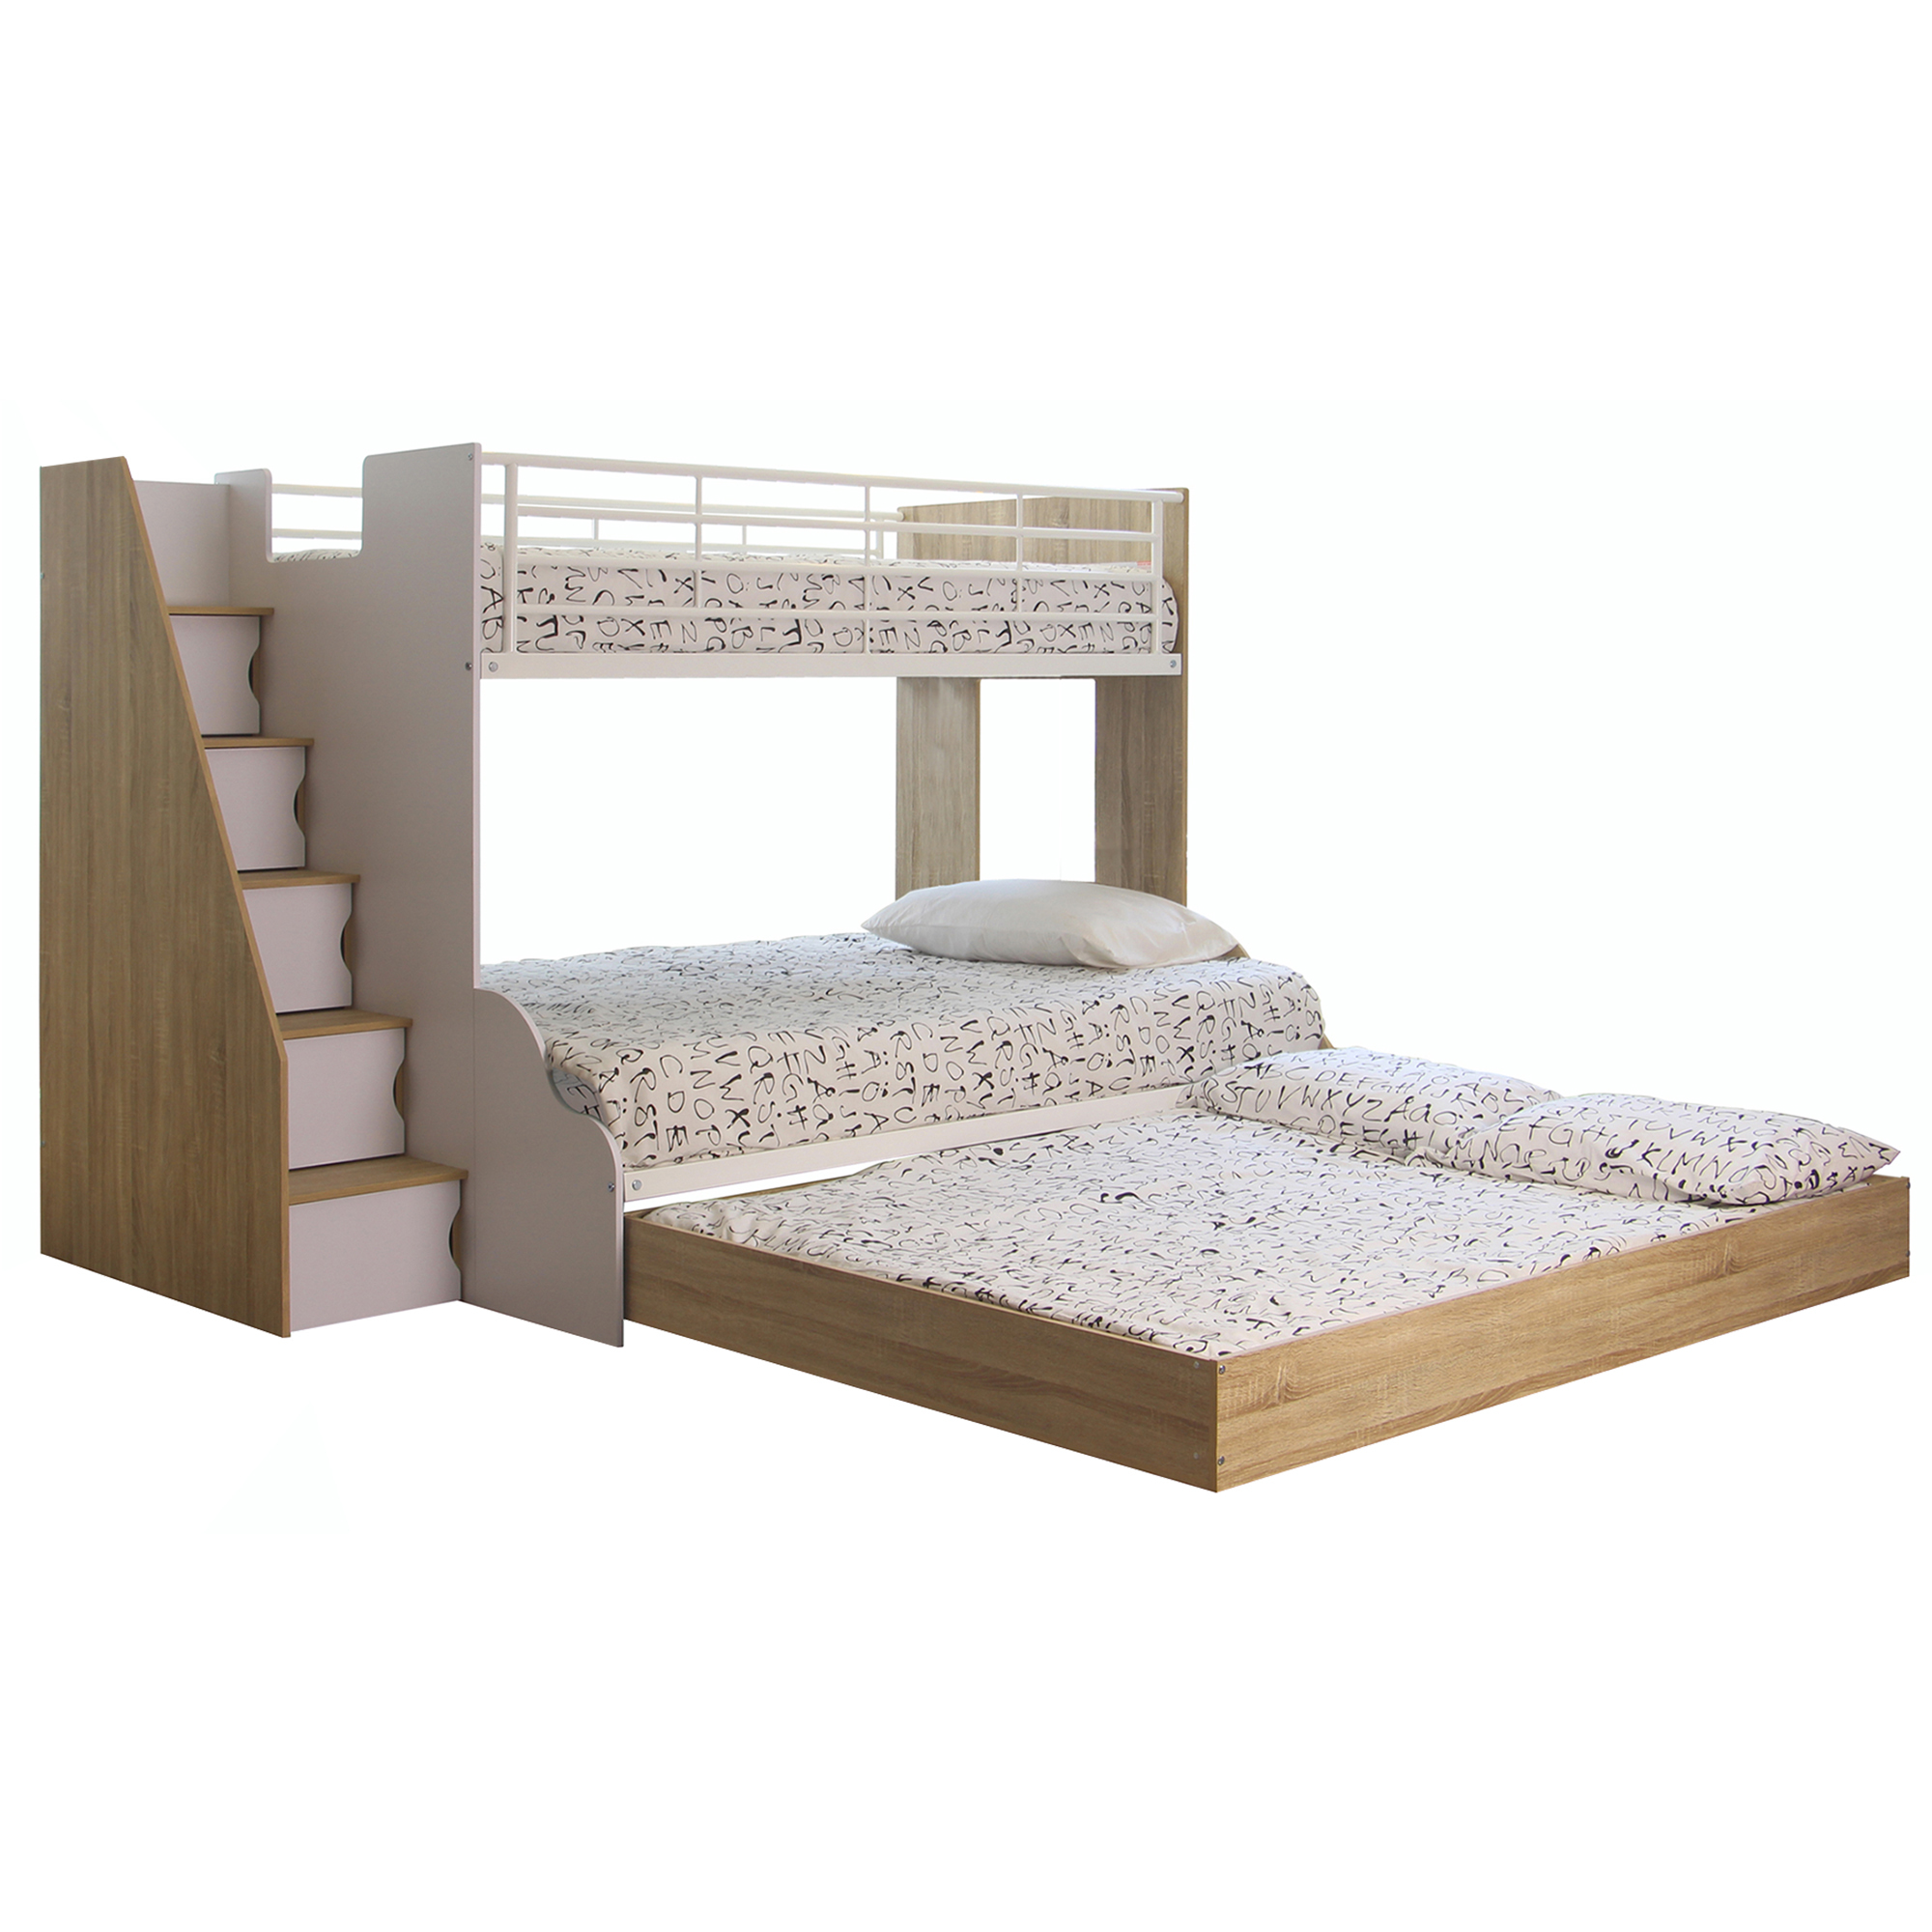 Vic Furniture Sonoma Levin Single Over, Double Bunk Bed Dimensions